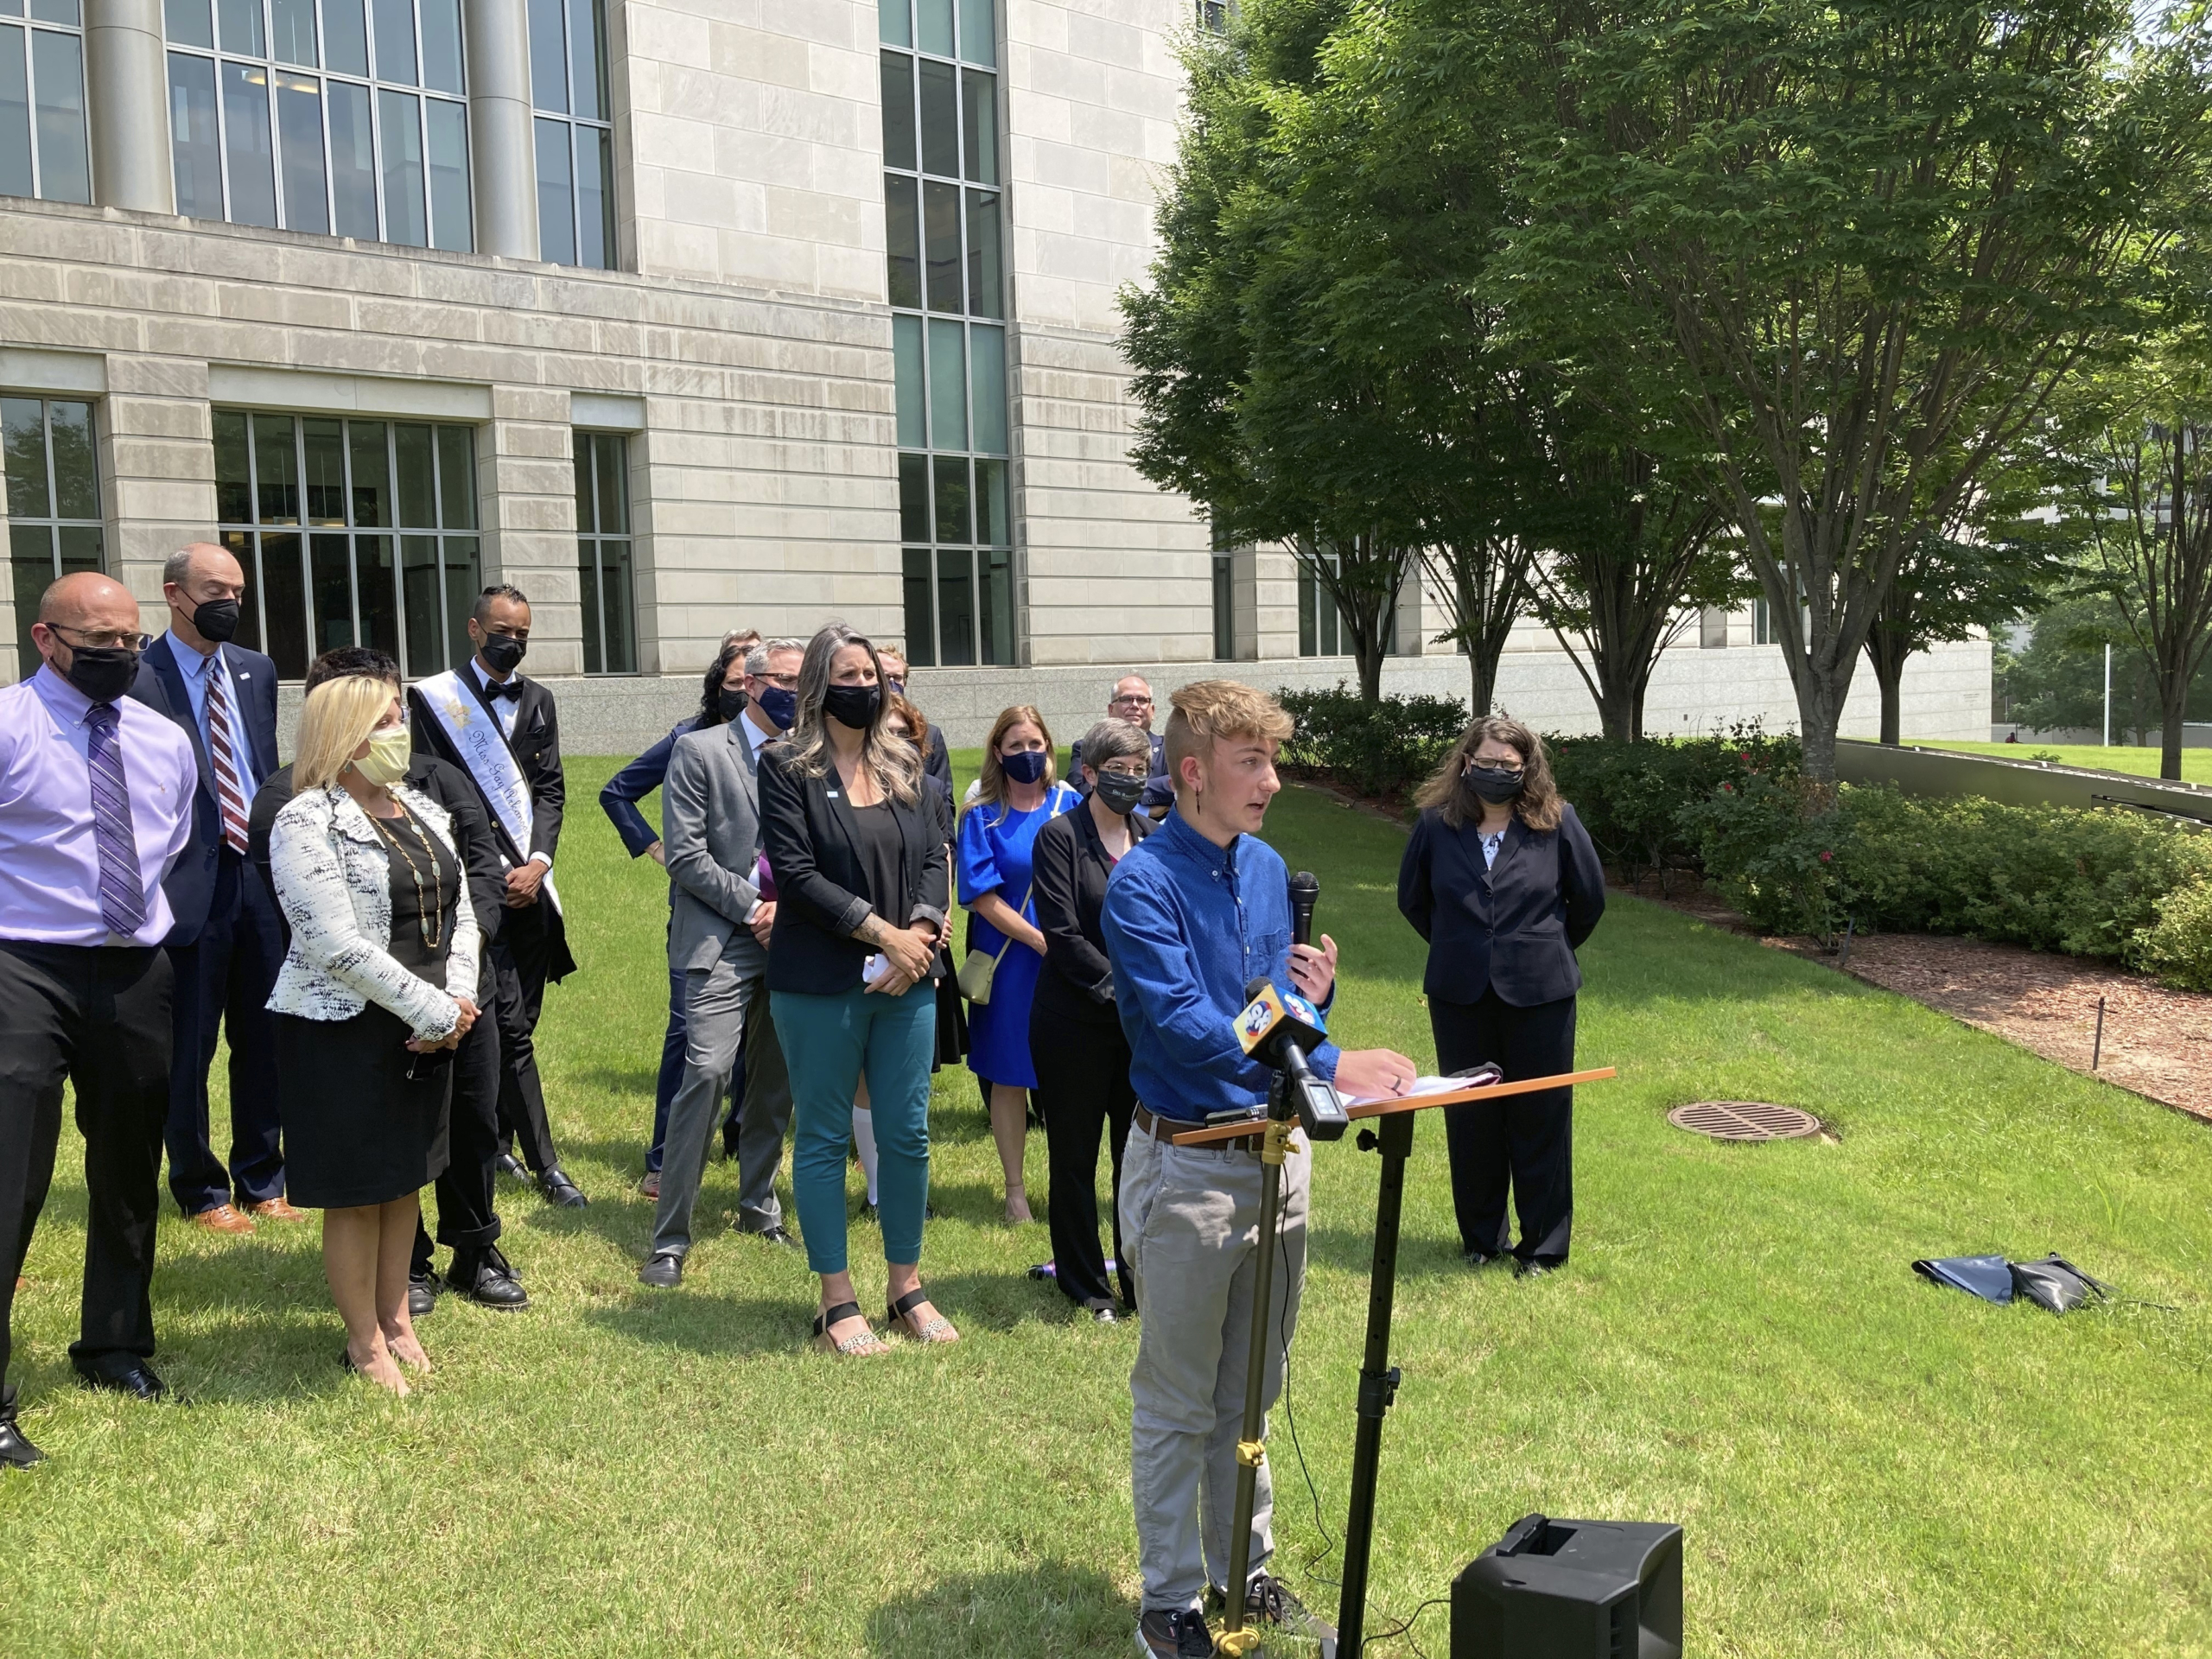 Transgender youth treatment: Crowd of people in business casual wear stand on a green lawn bedind a young asult with blonde hairwearinga blue shirt and tan pants, speaking into a microphone to a crowd off-camera.